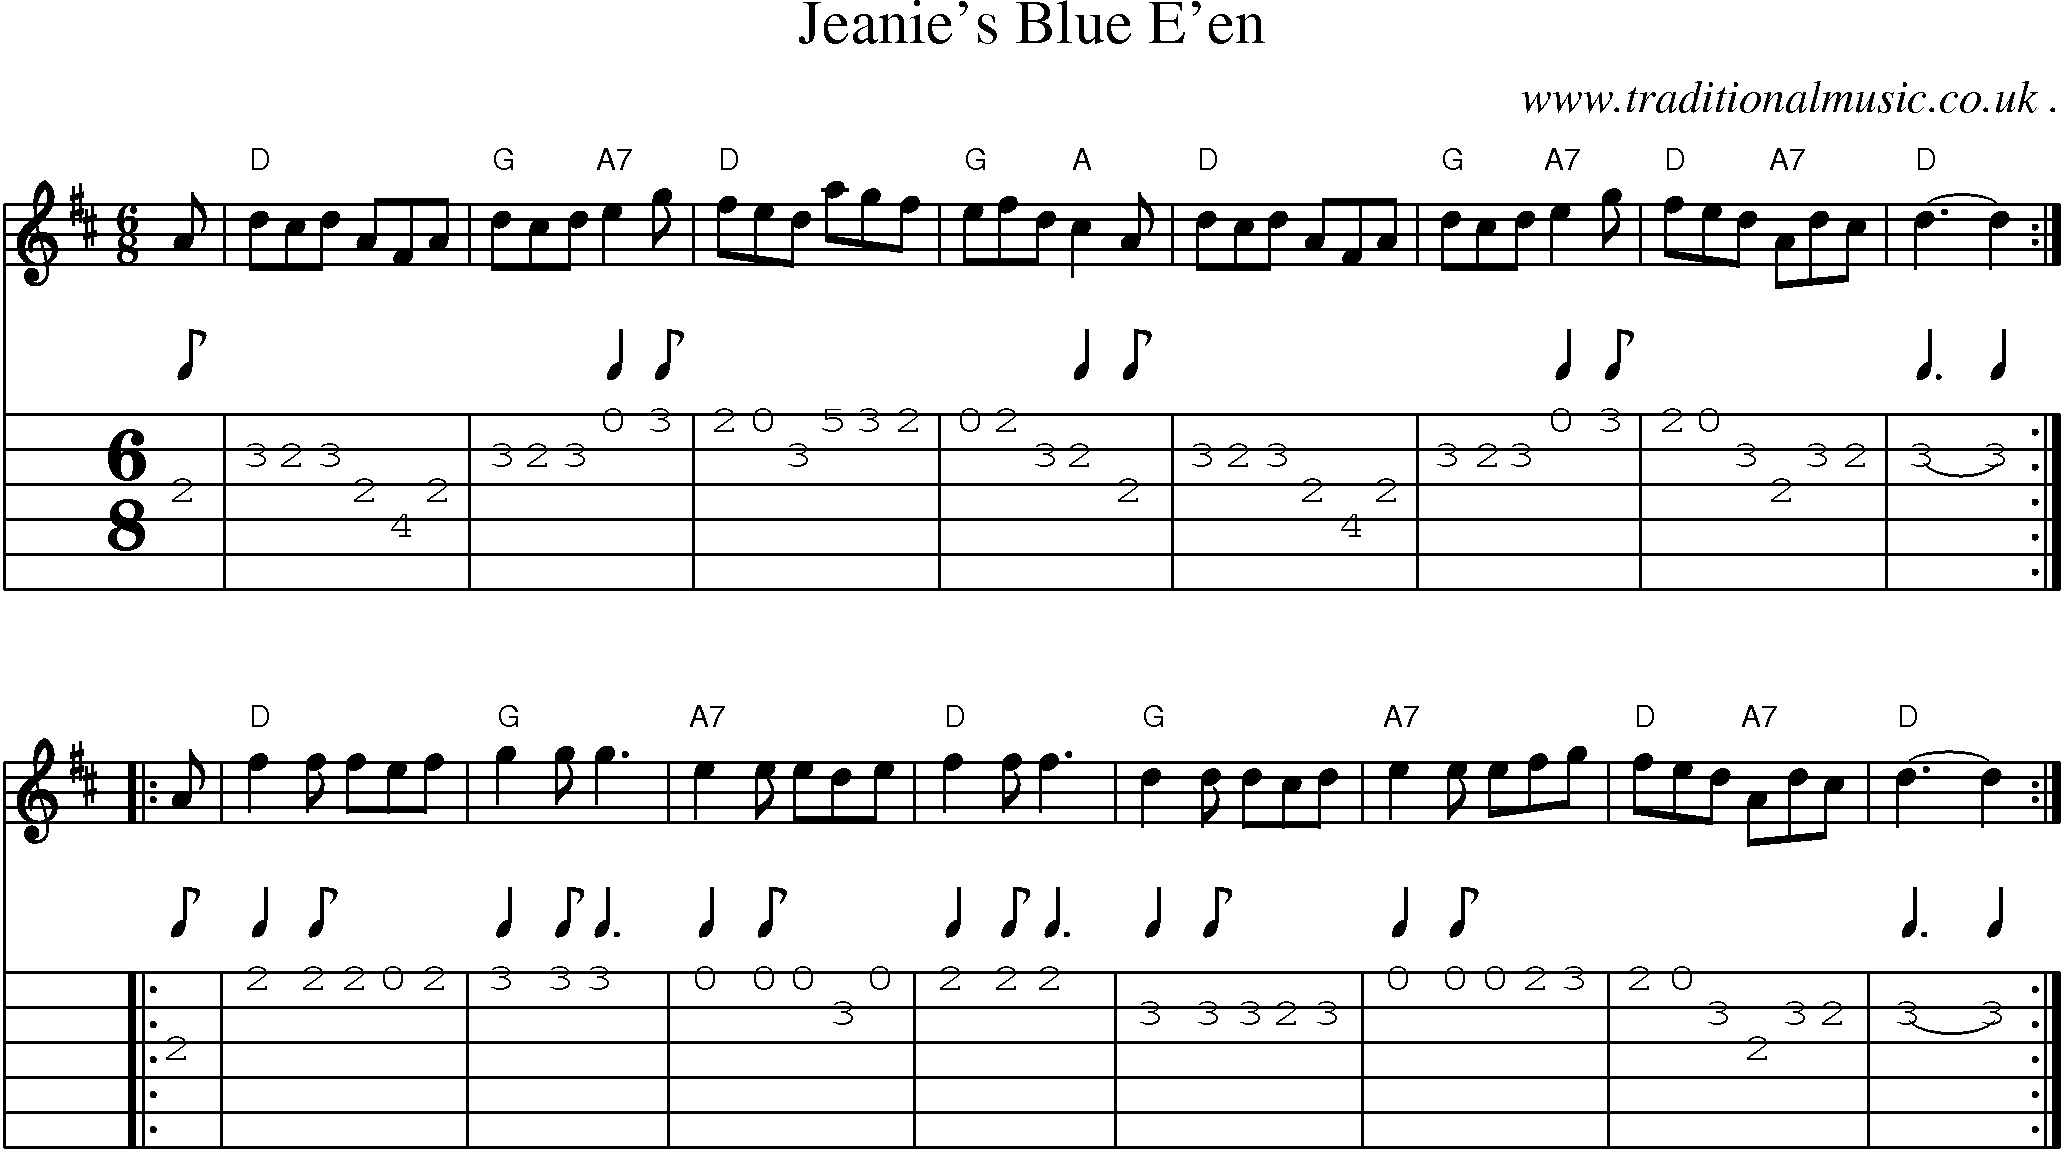 Sheet-music  score, Chords and Guitar Tabs for Jeanies Blue Een